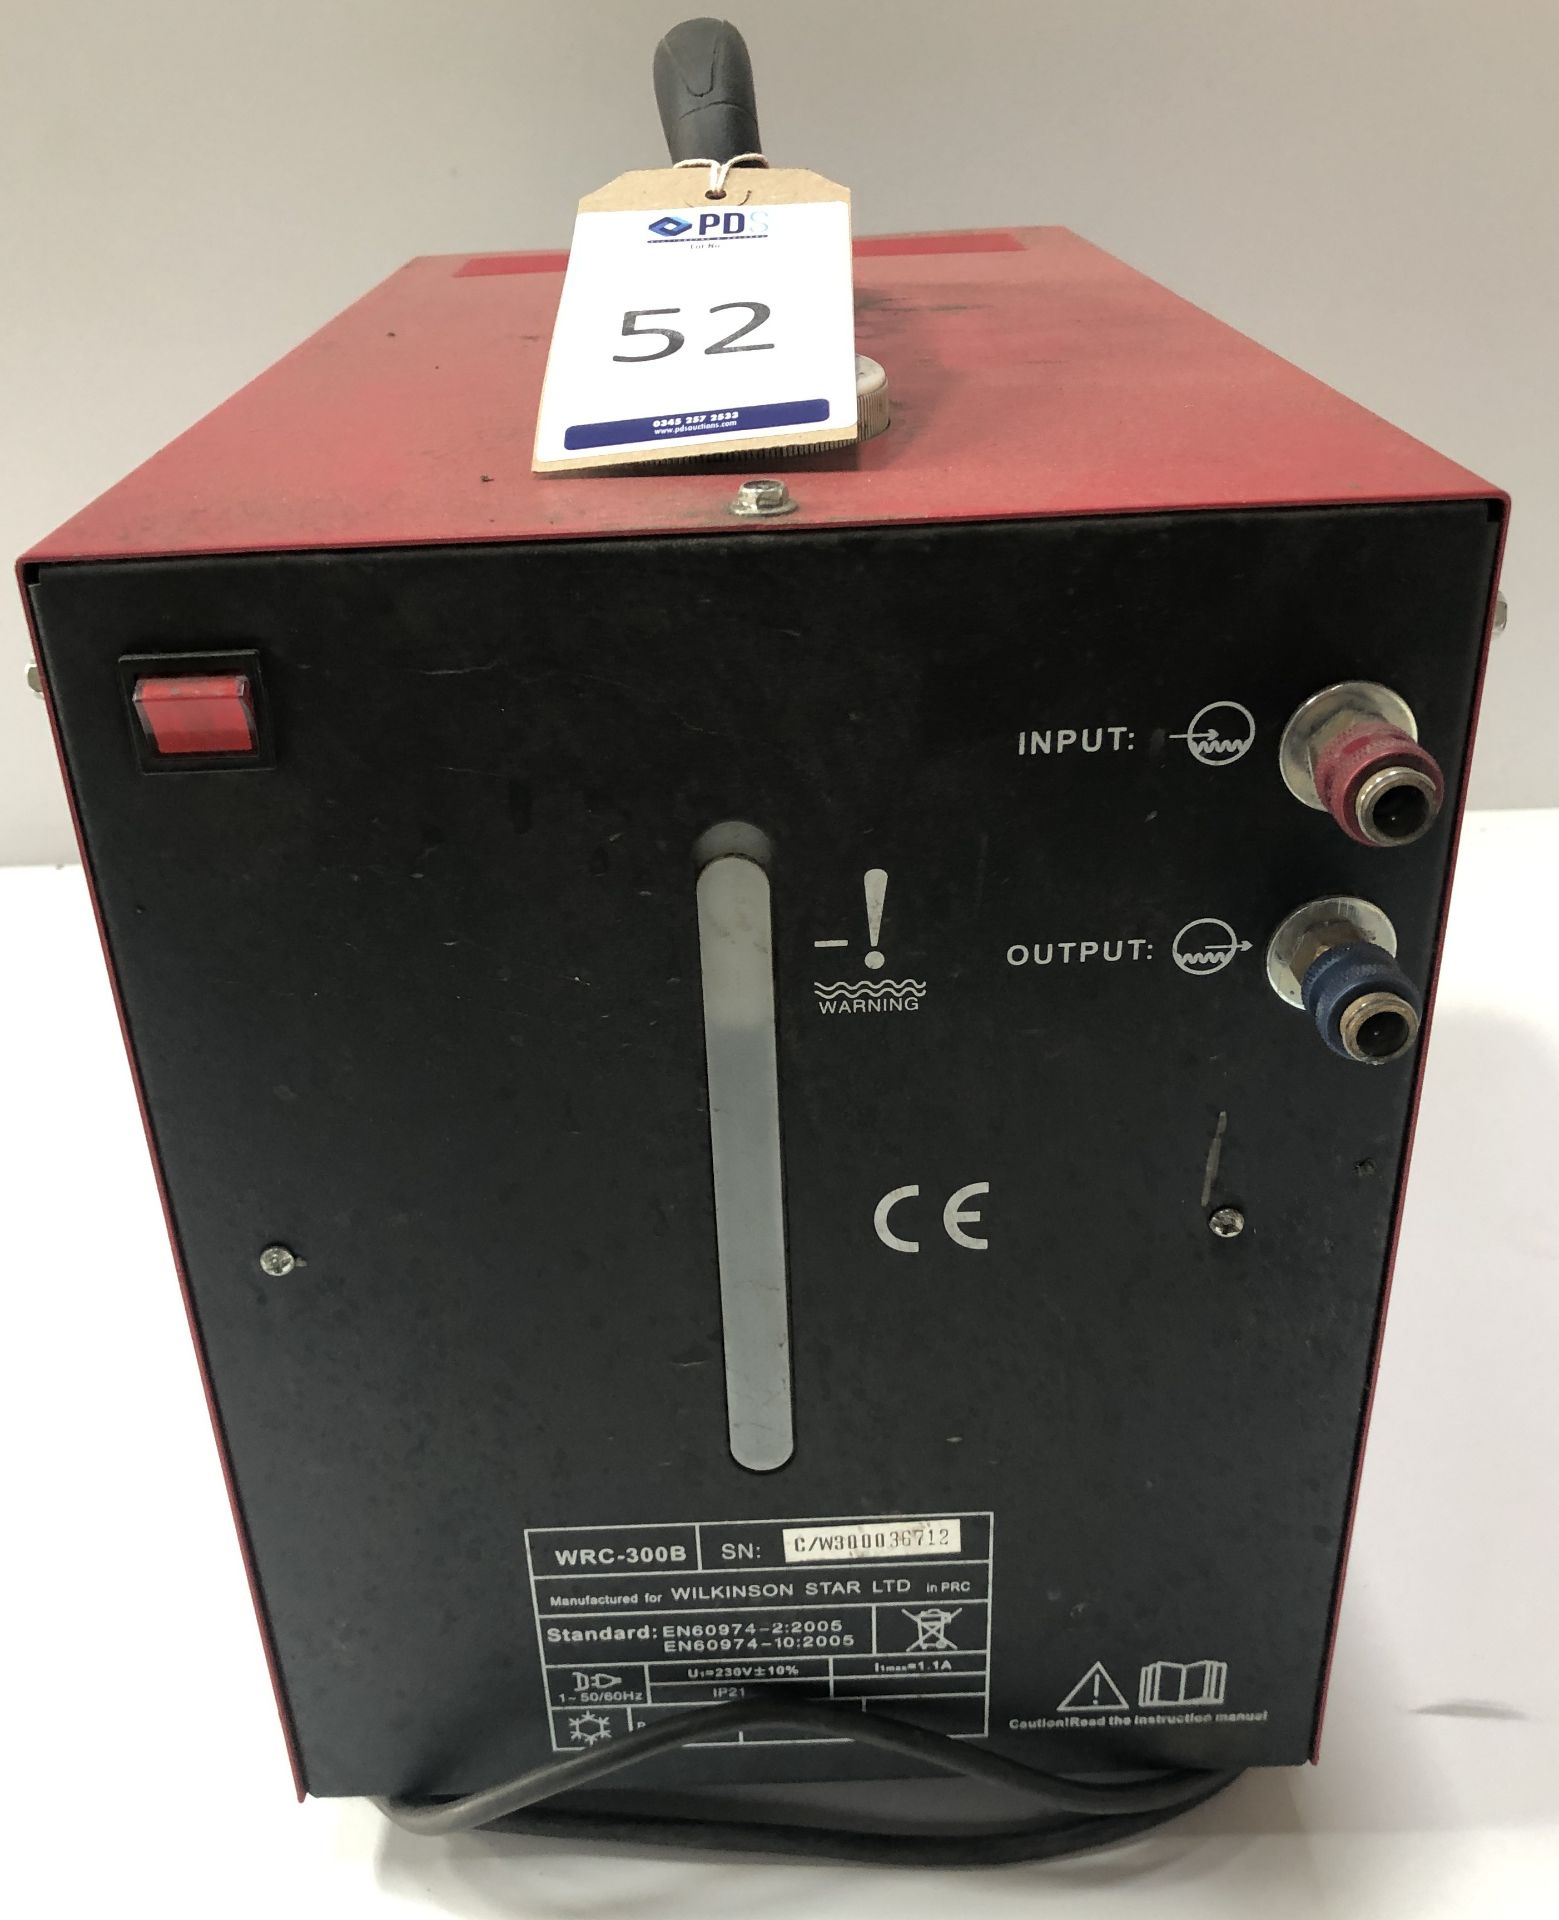 Sherman WRC-300B Welding Water Cooler, Serial Number C/W300036712 (Location: Brentwood. Please Refer